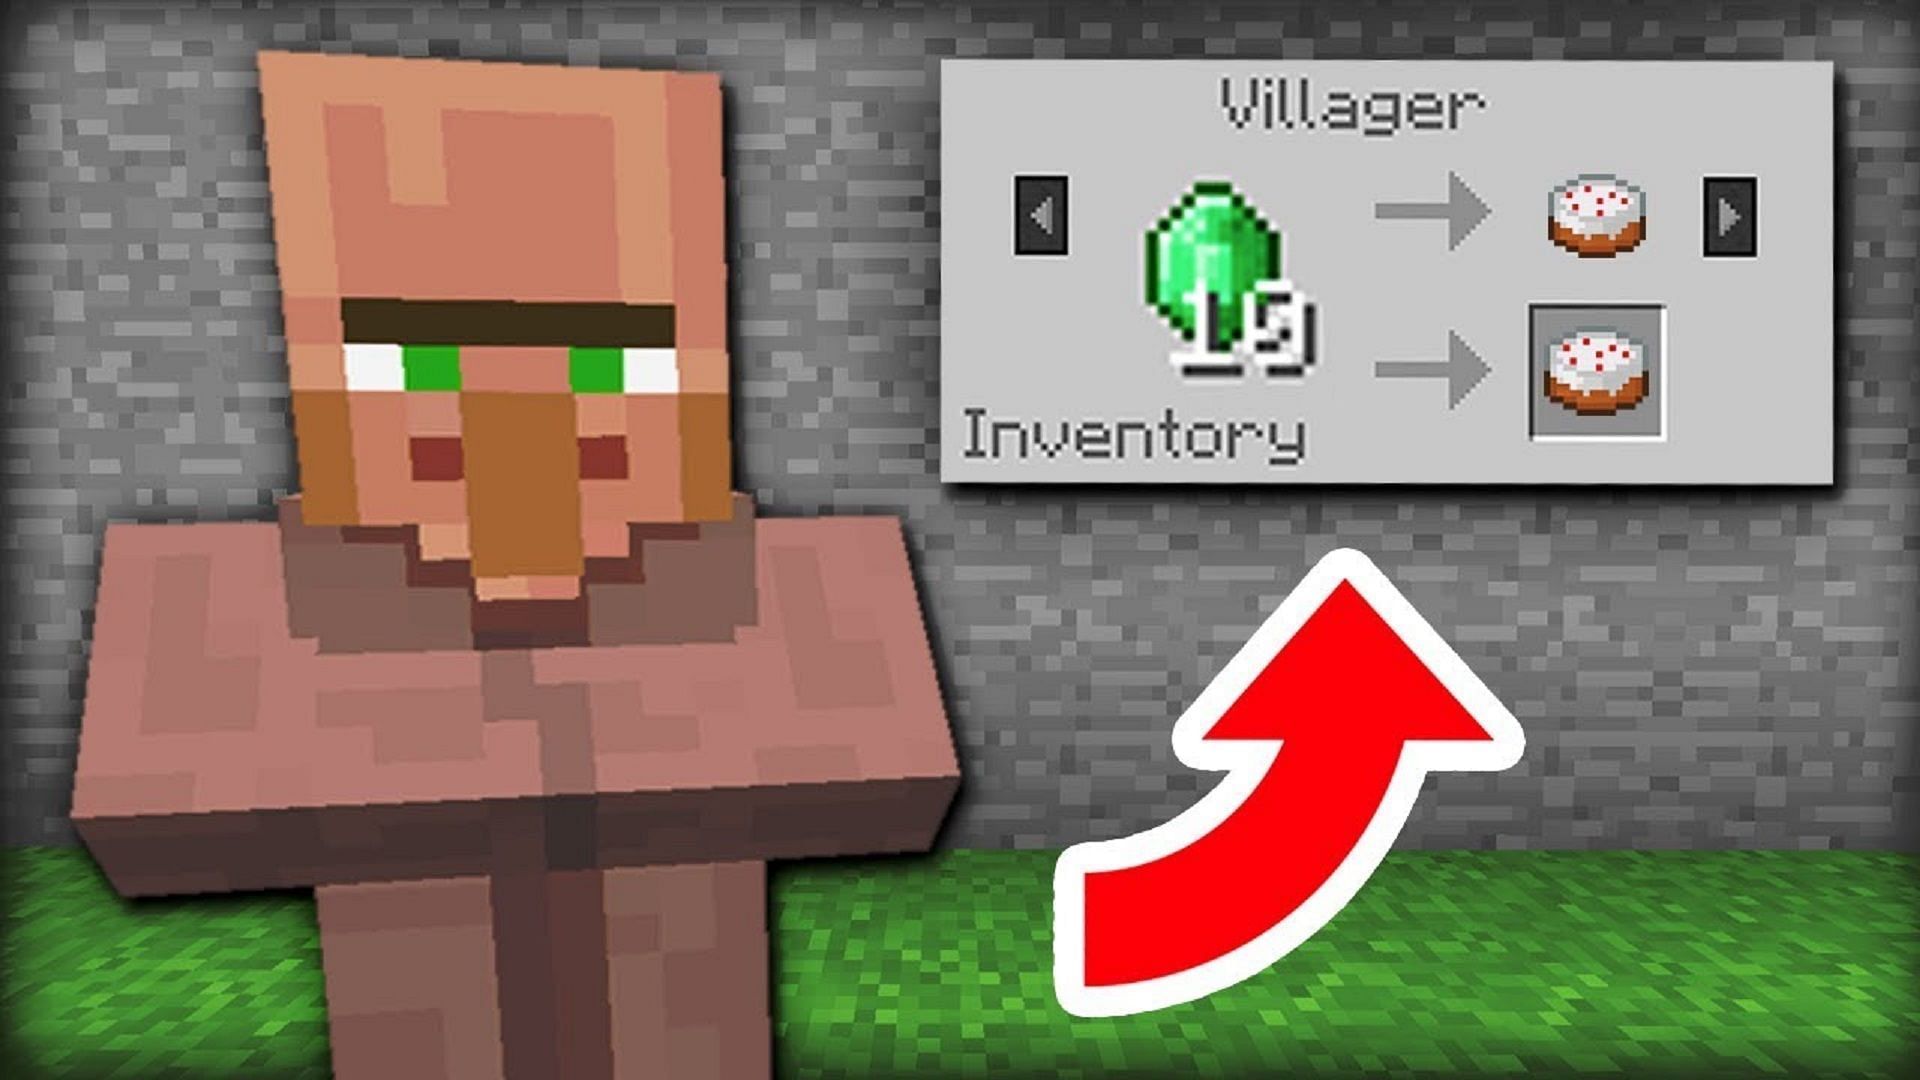 This modpack keeps villagers from closing out trades (Image via iDeactivateMC/Youtube)